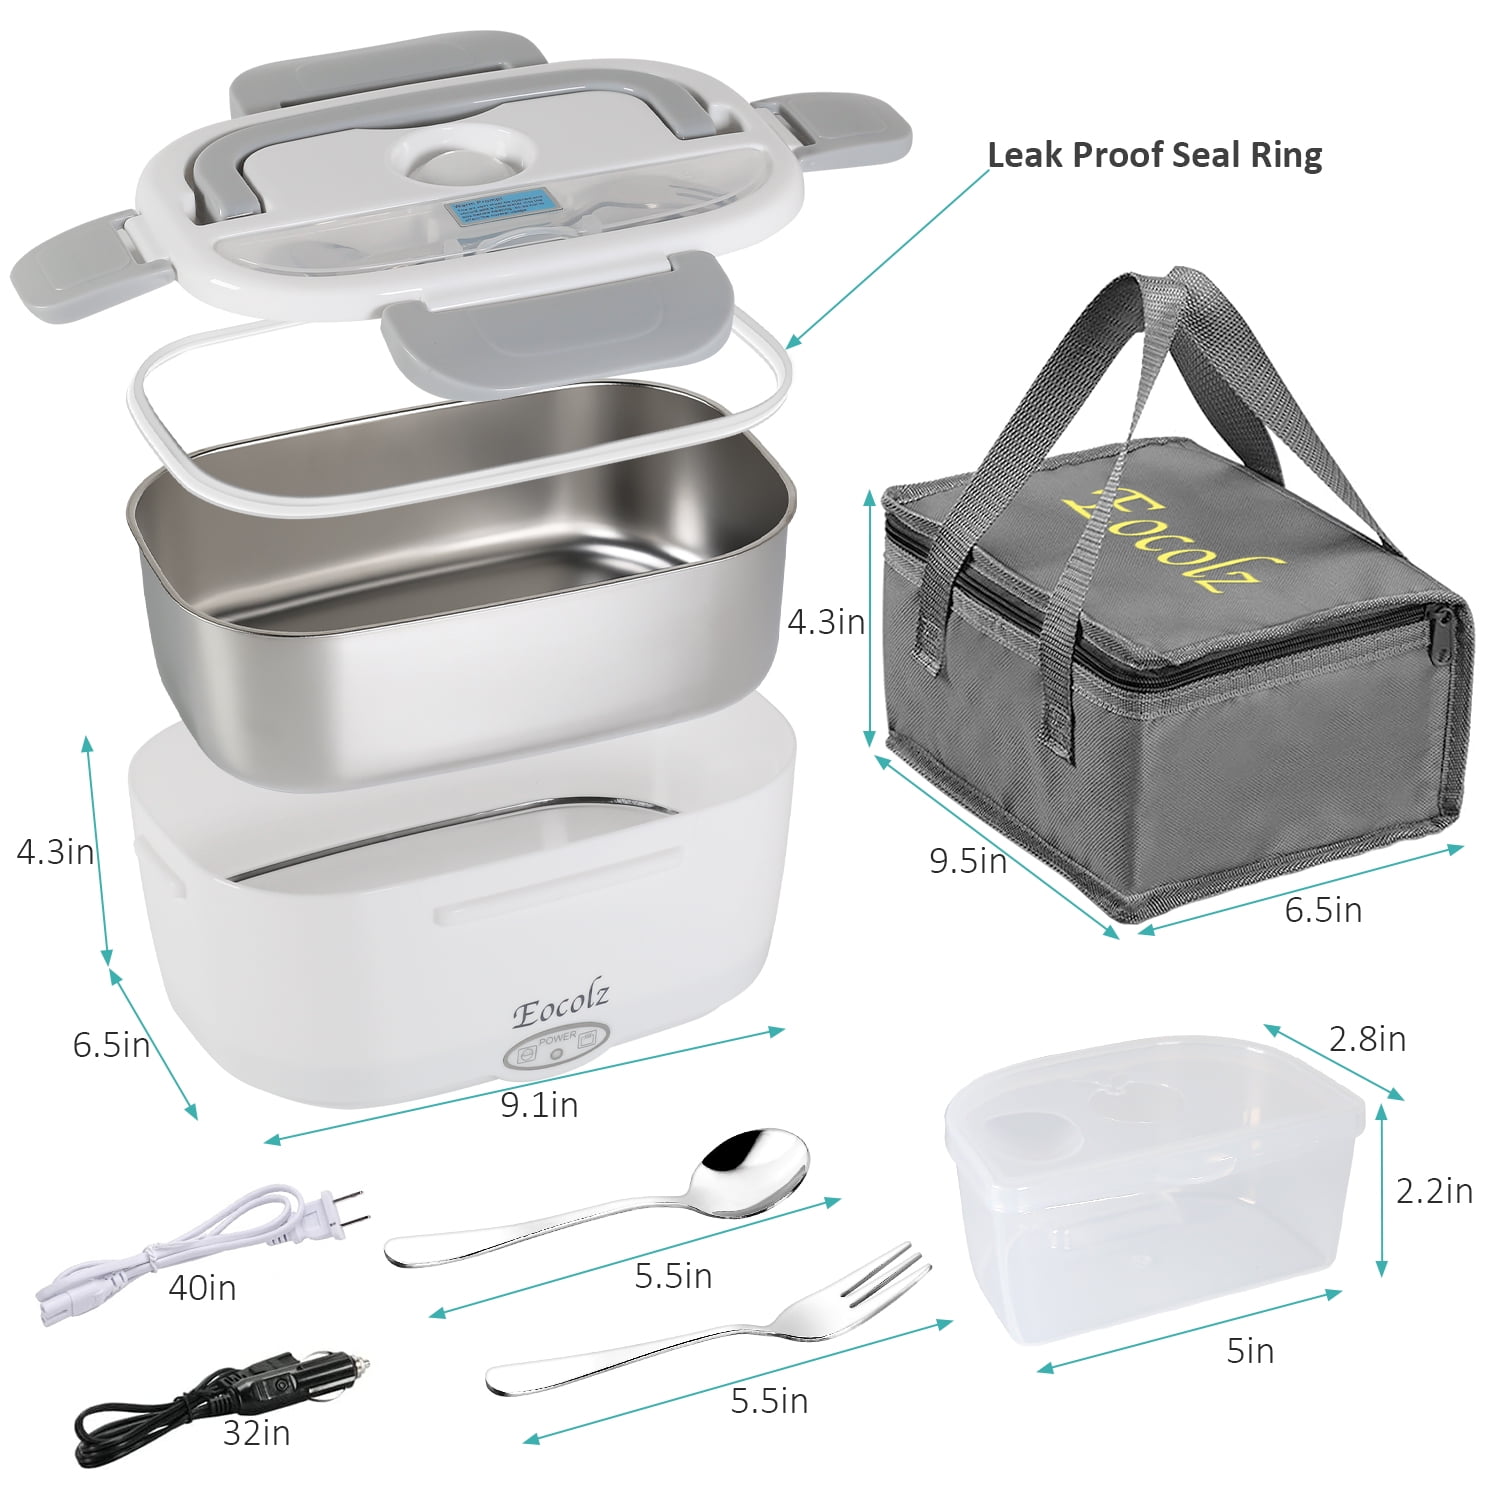 Bari Electric Lunch Box For Car, Truck And Office - 60W + 110v +